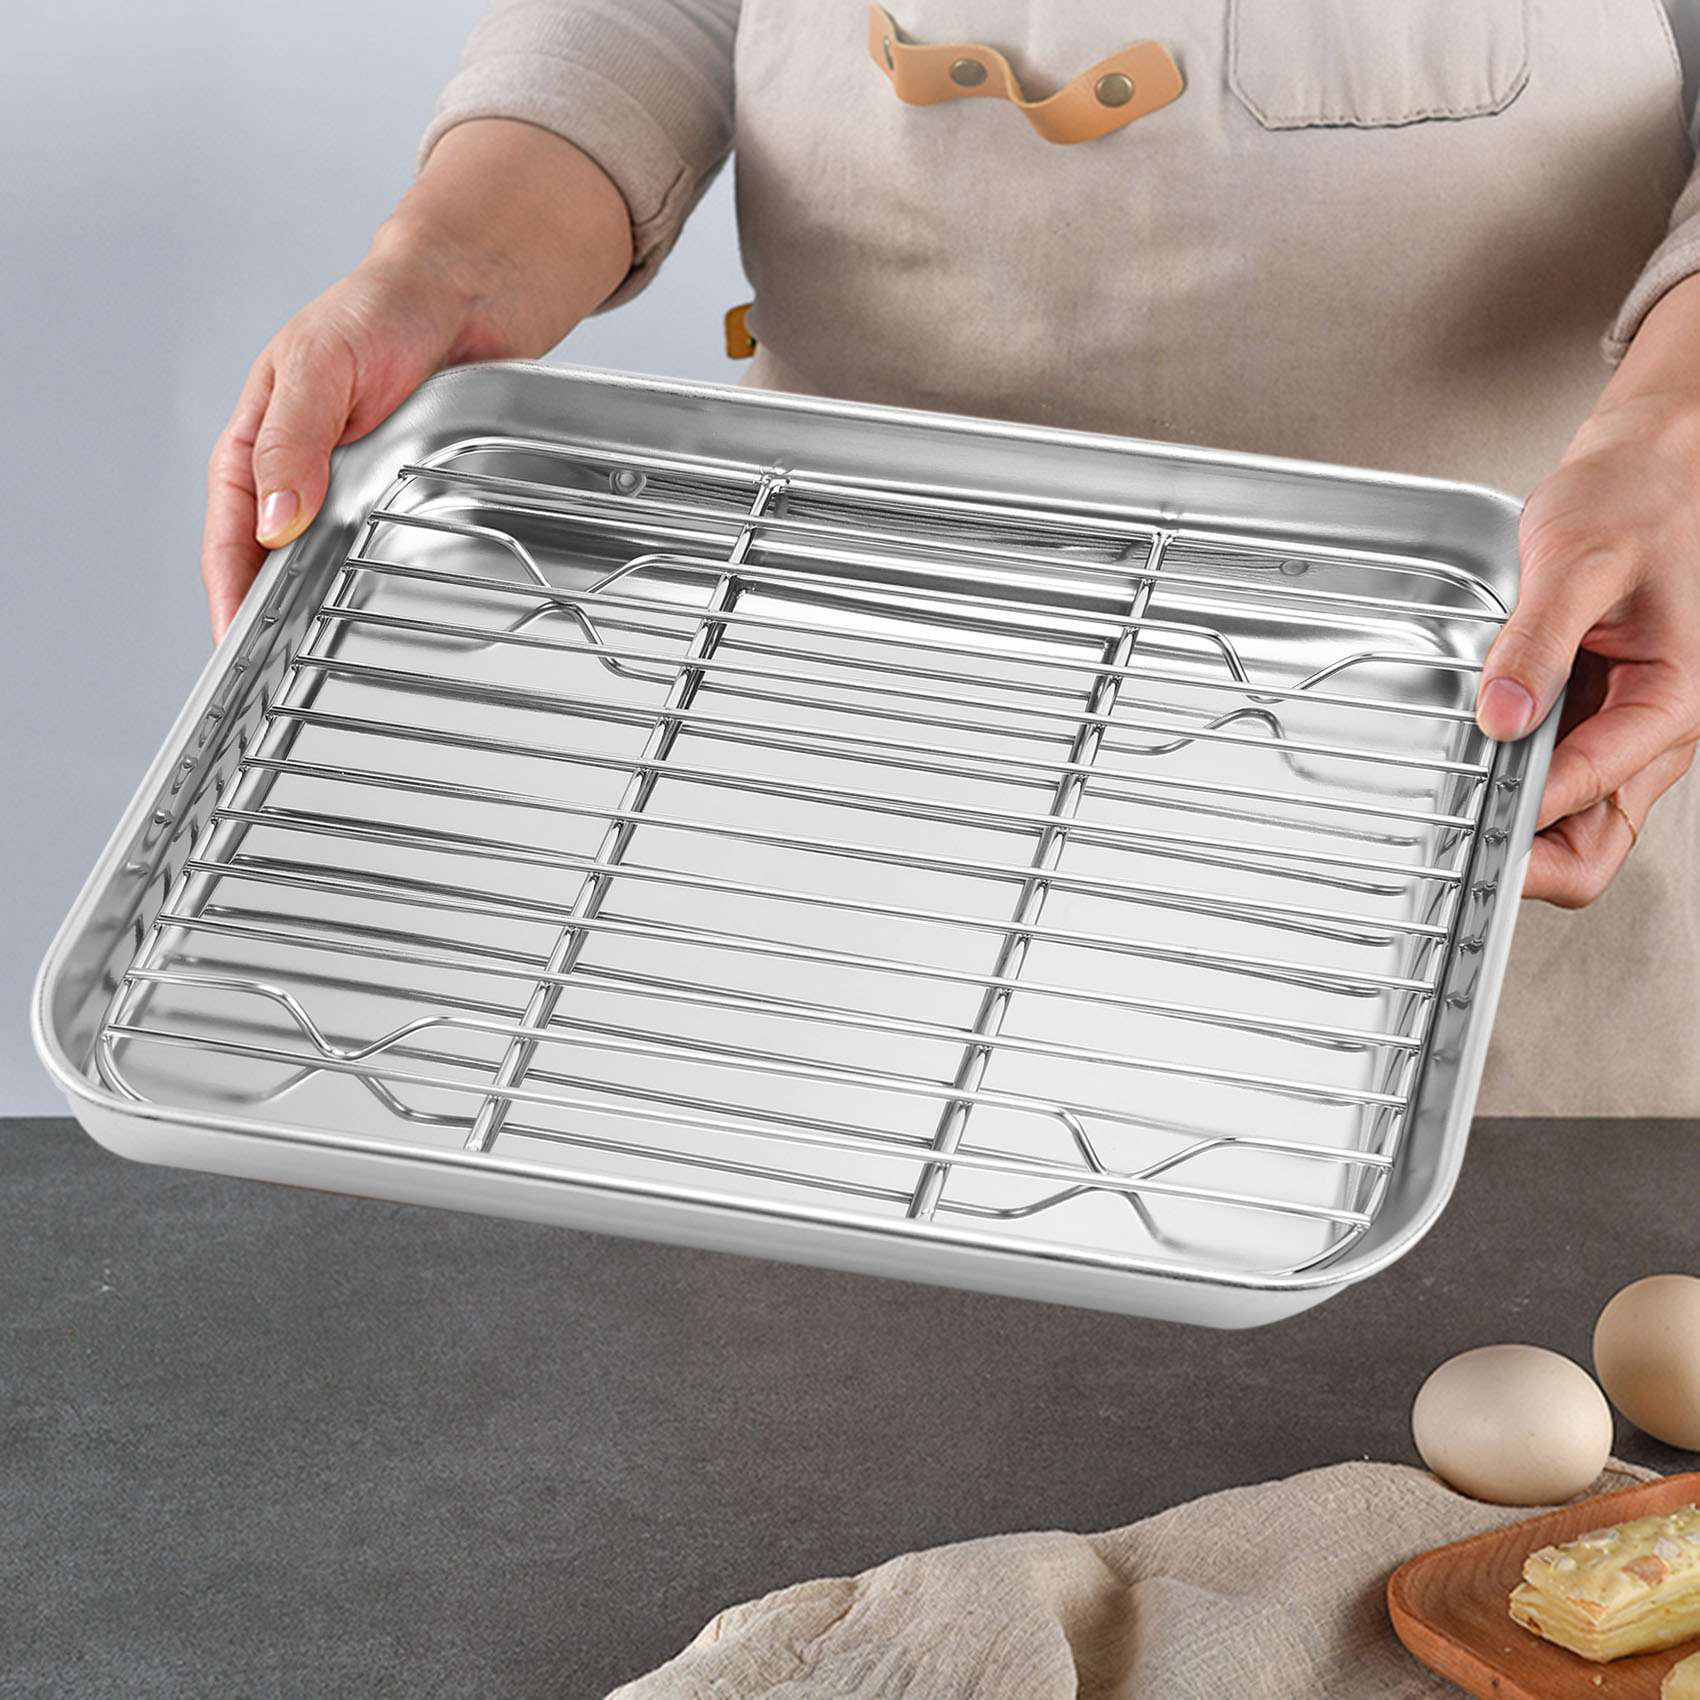 Oven Tray And Rack